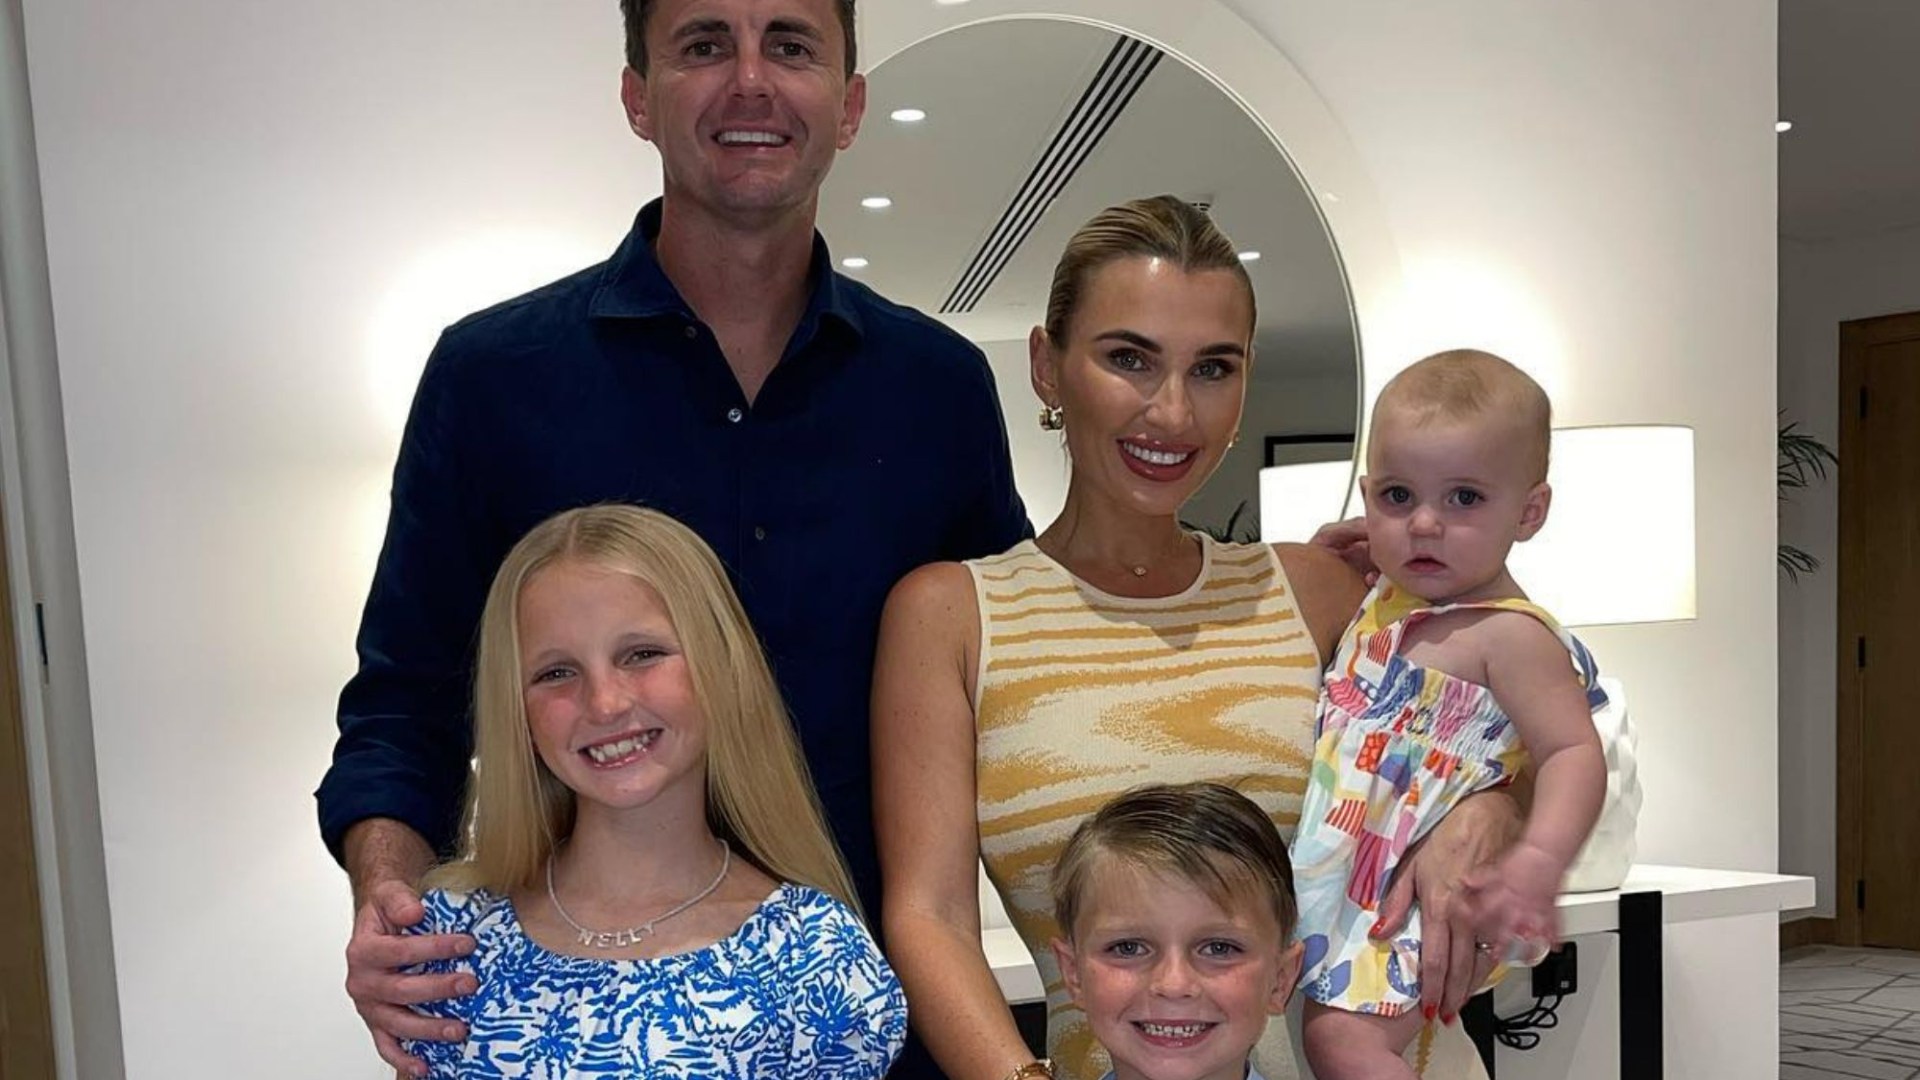 Inside the life of Billie Faiers’ 3 kids 5k Chanel handbags & 1k a night trips as star’s slammed for flaunting wealth [Video]